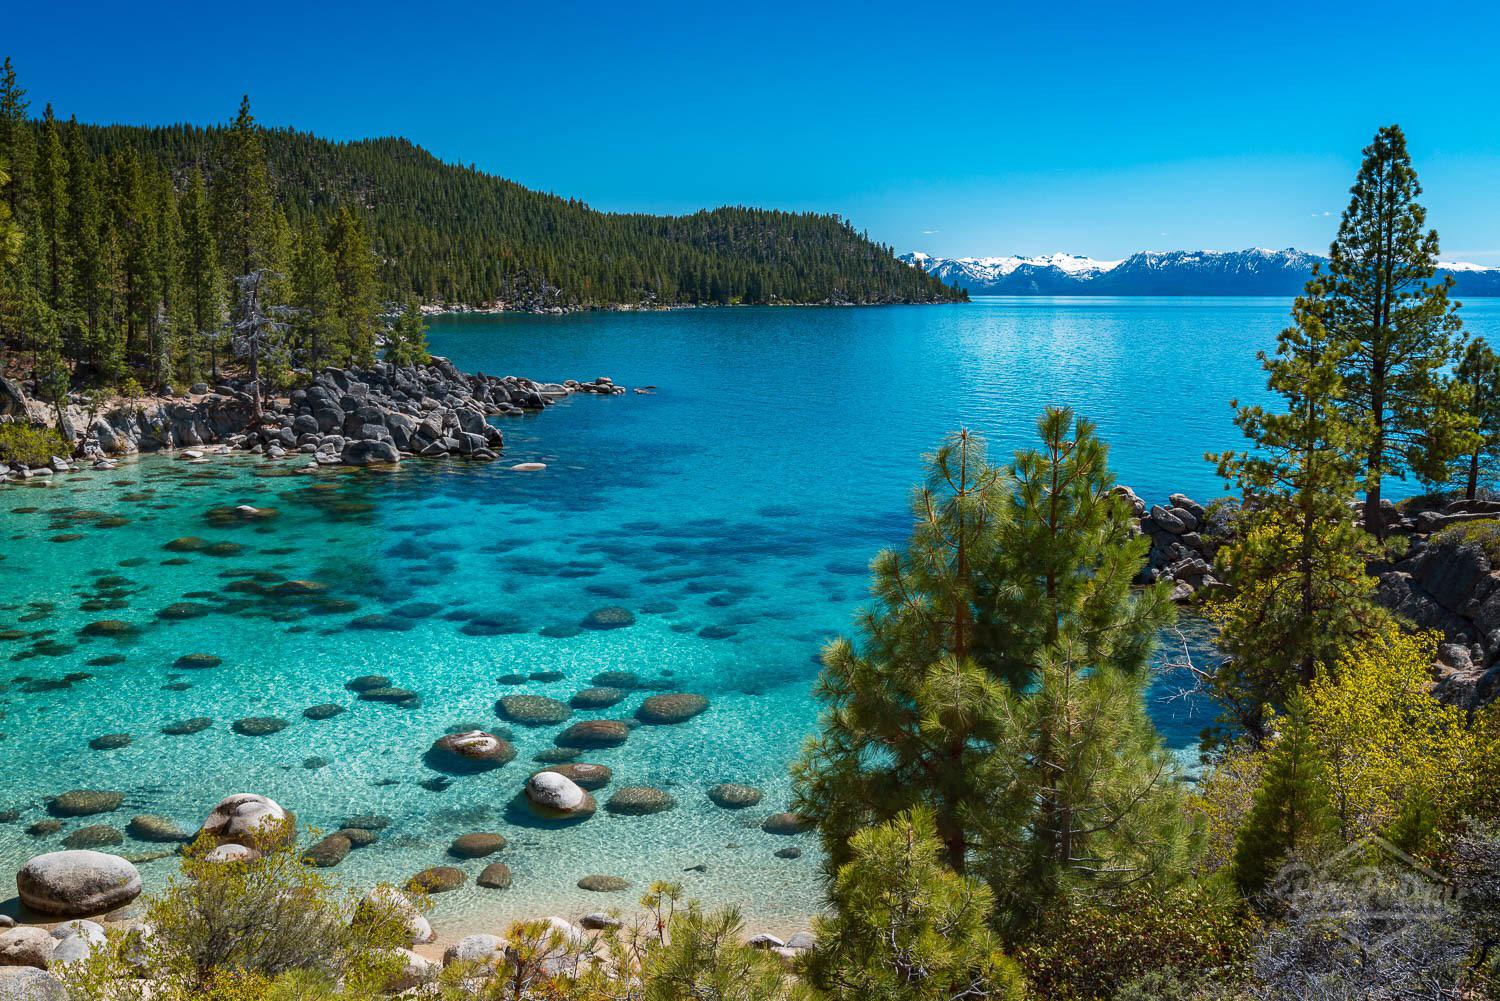 Who wants to take a late summer dip in the refreshing waters in Secret Cove, Lake Tahoe, CA?